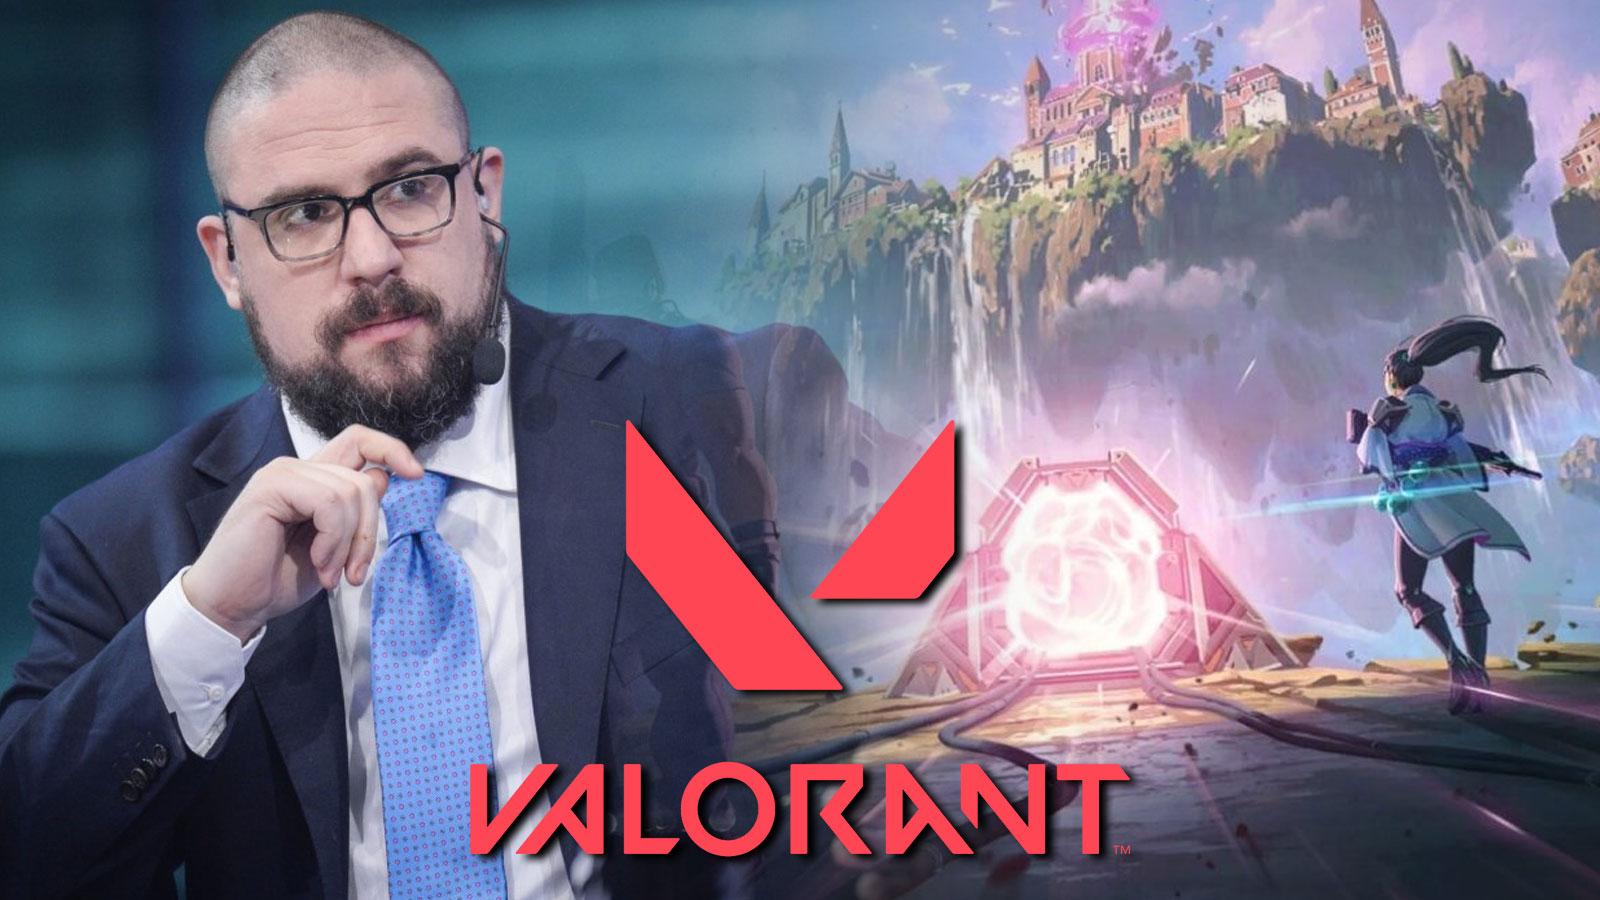 Download Unstoppable Gaming with Valorant